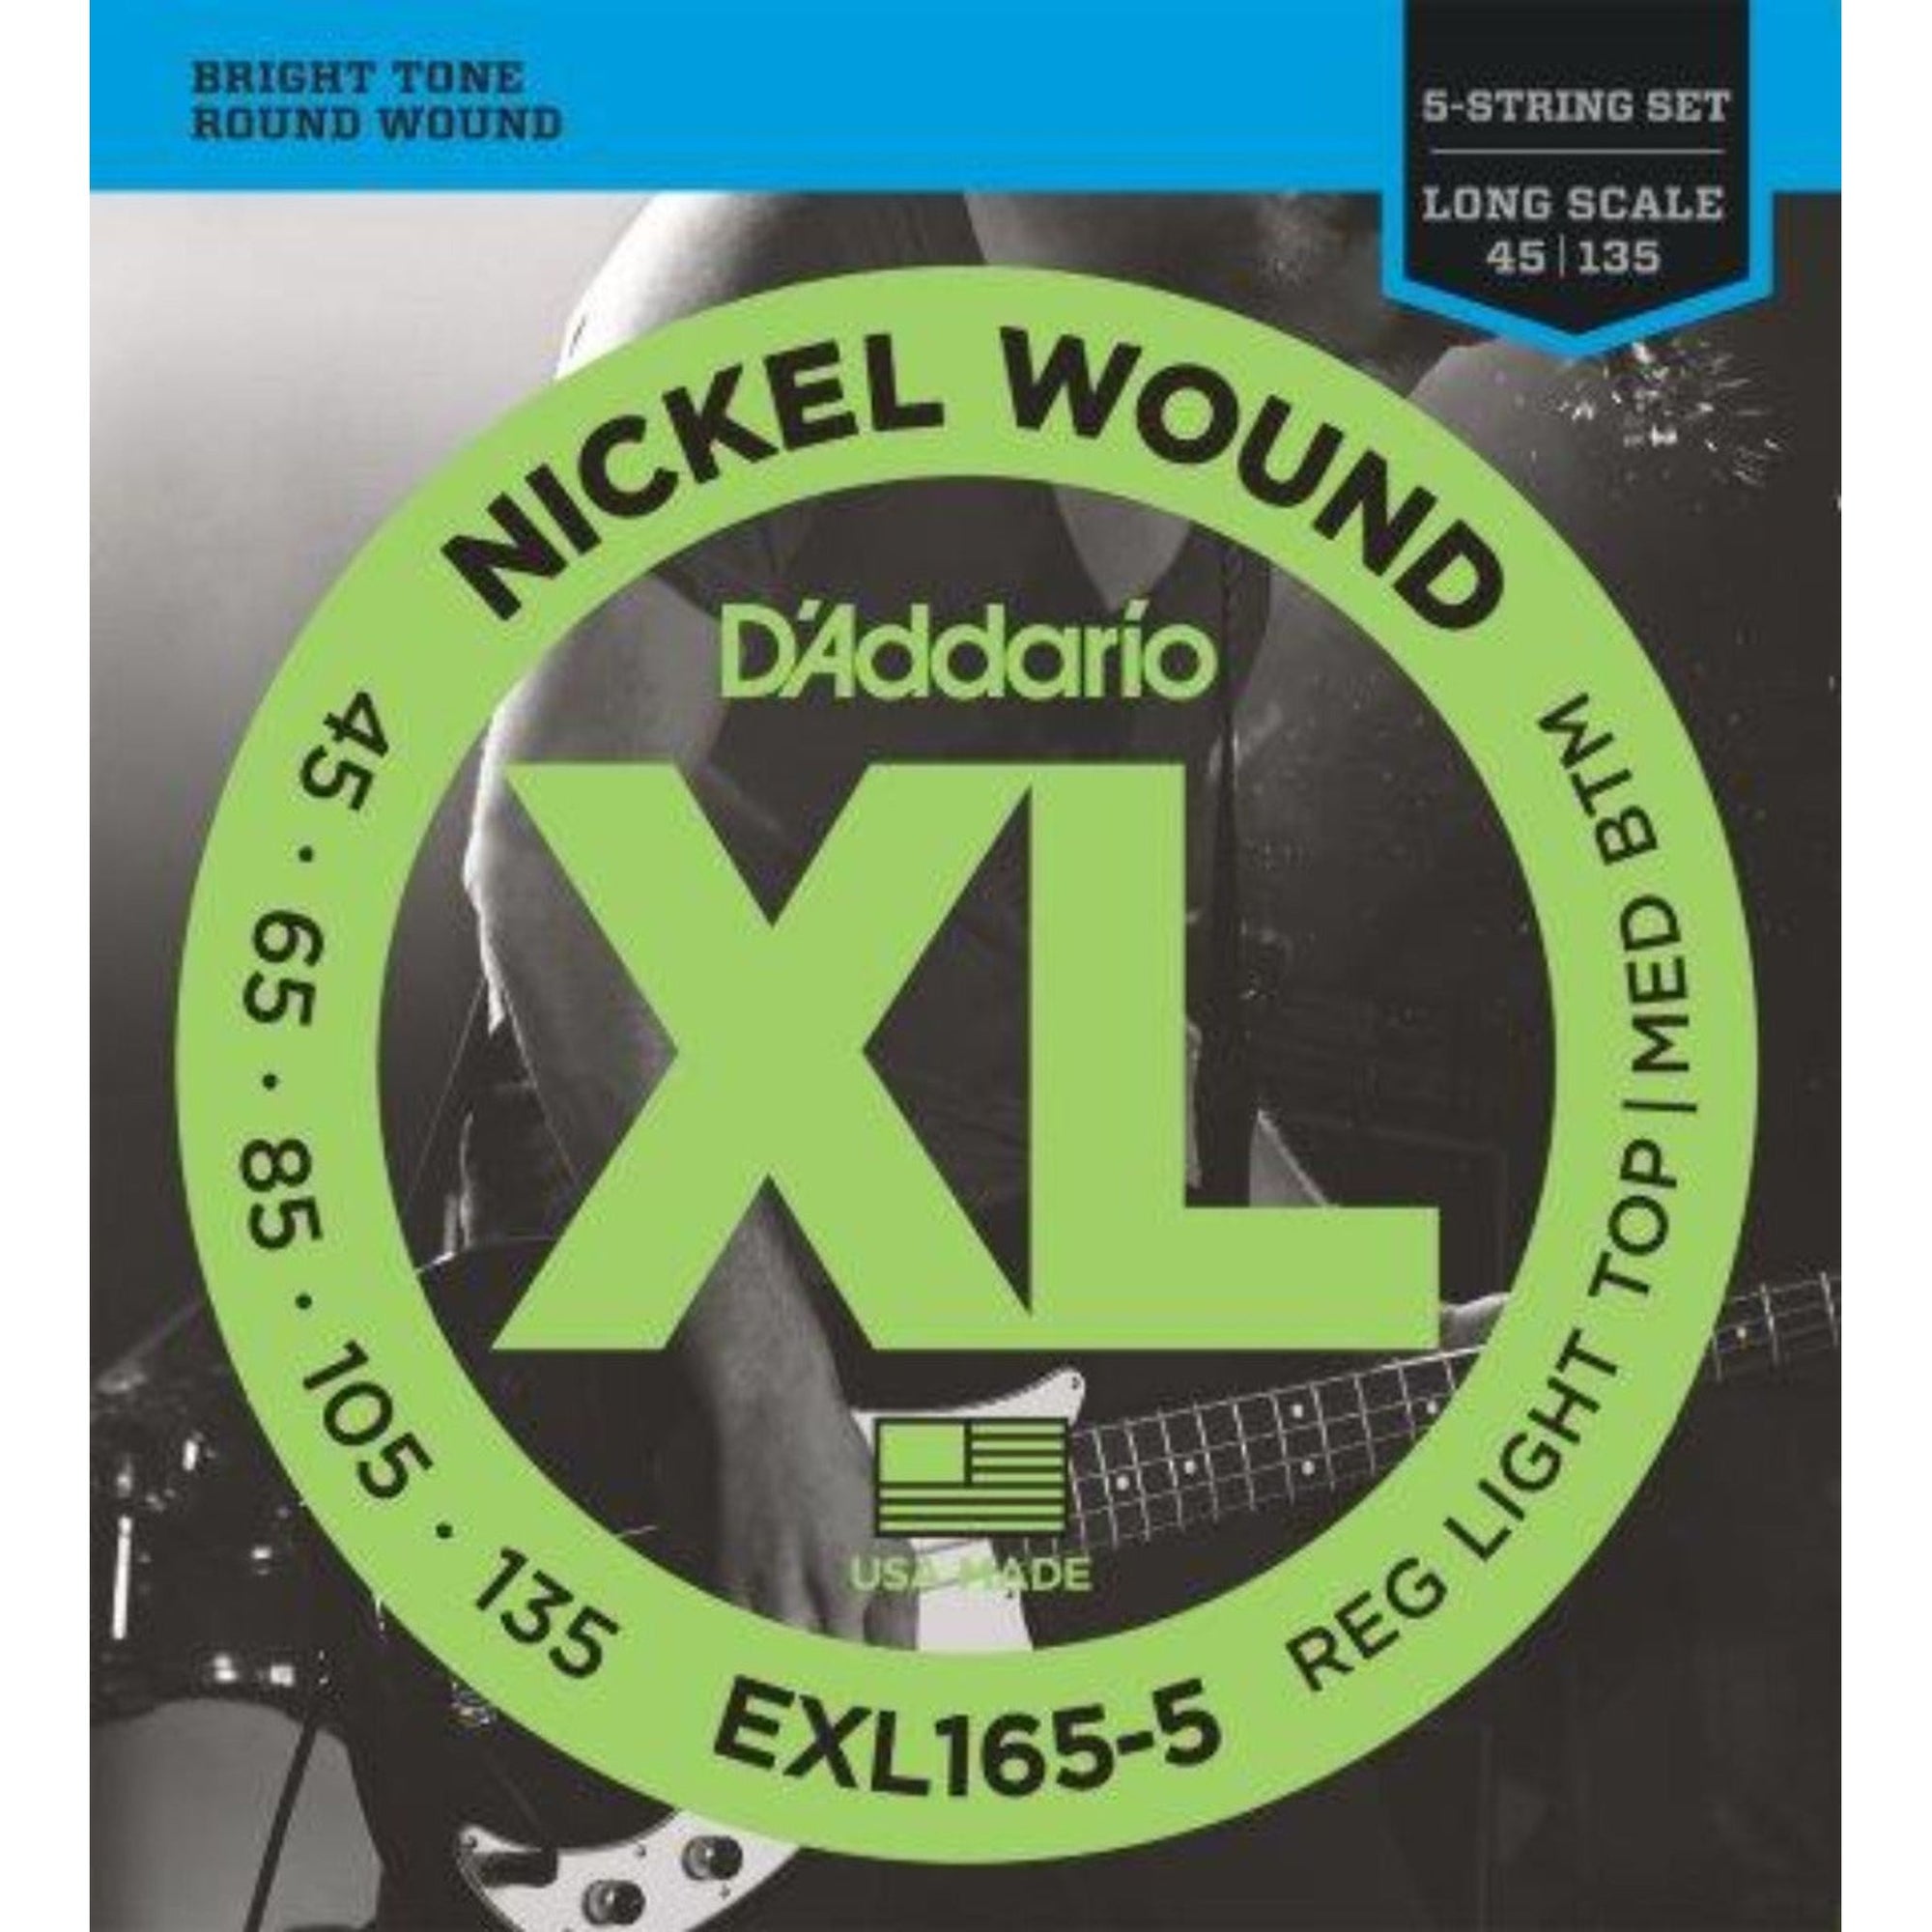 D'Addario XL Nickel Wound Electric Bass strings are world-renowned as "The Player's Choice" amongst bass players of all genres and styles